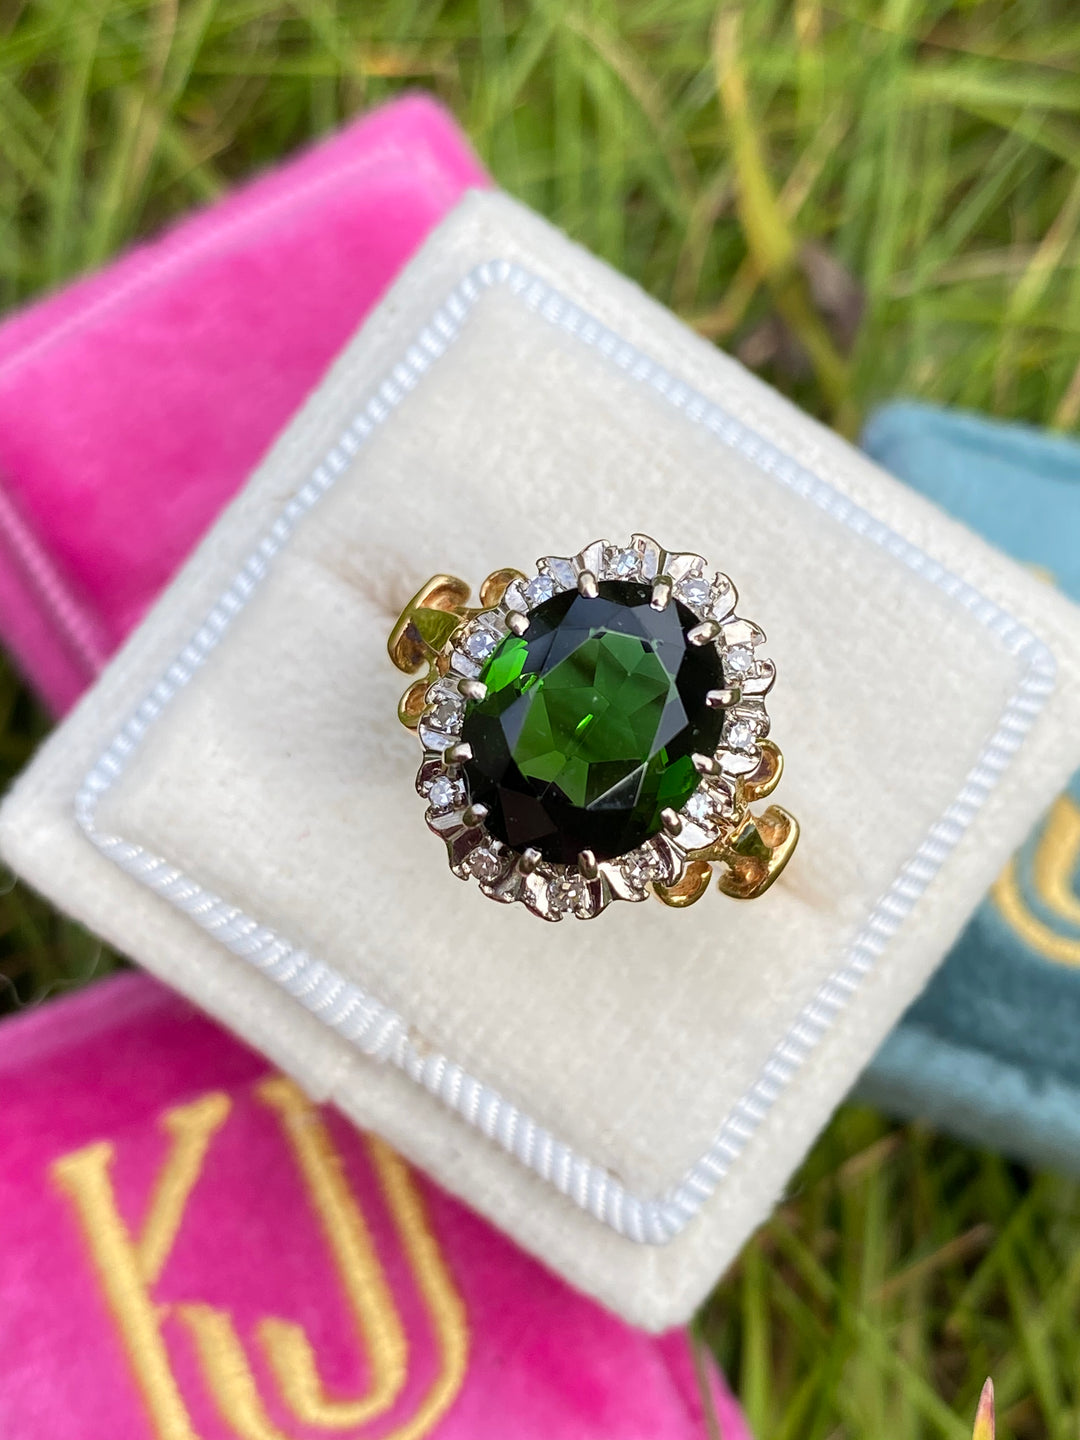 5 Carat oval Cut Green Tourmaline and Diamond Halo Ring in Yellow Gold 